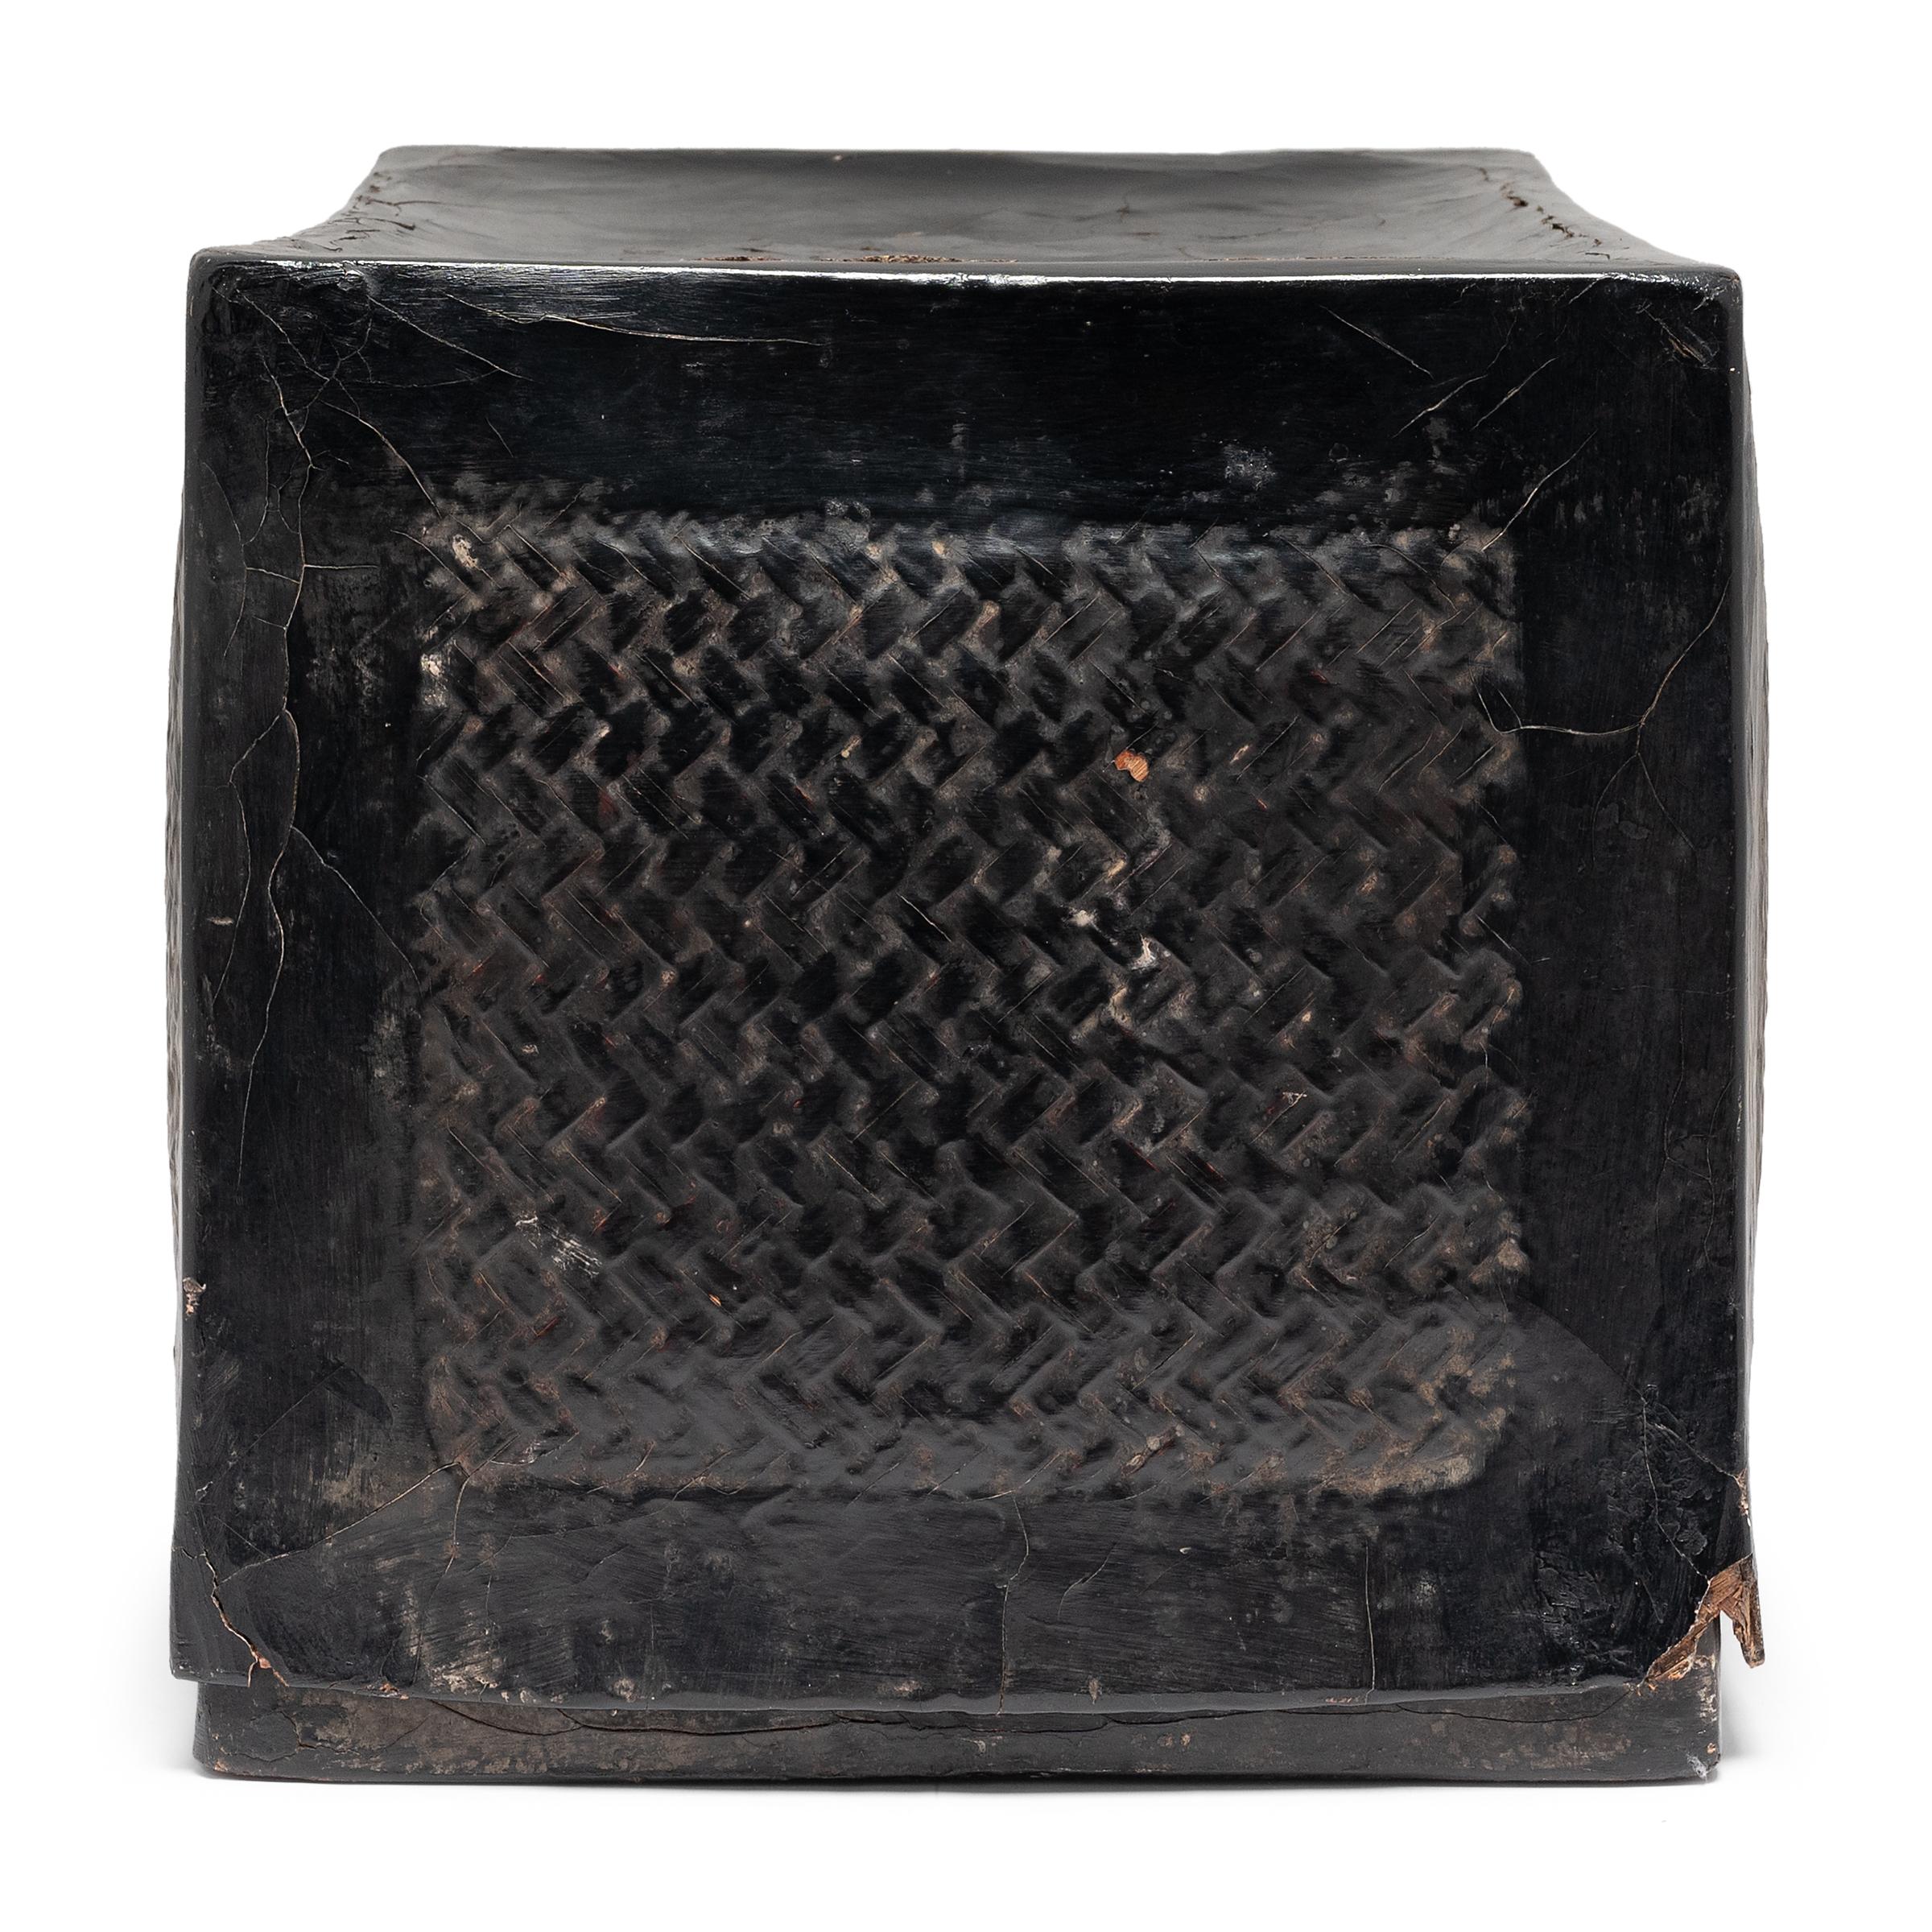 Rustic Chinese Black Lacquer Woven Box, c. 1900